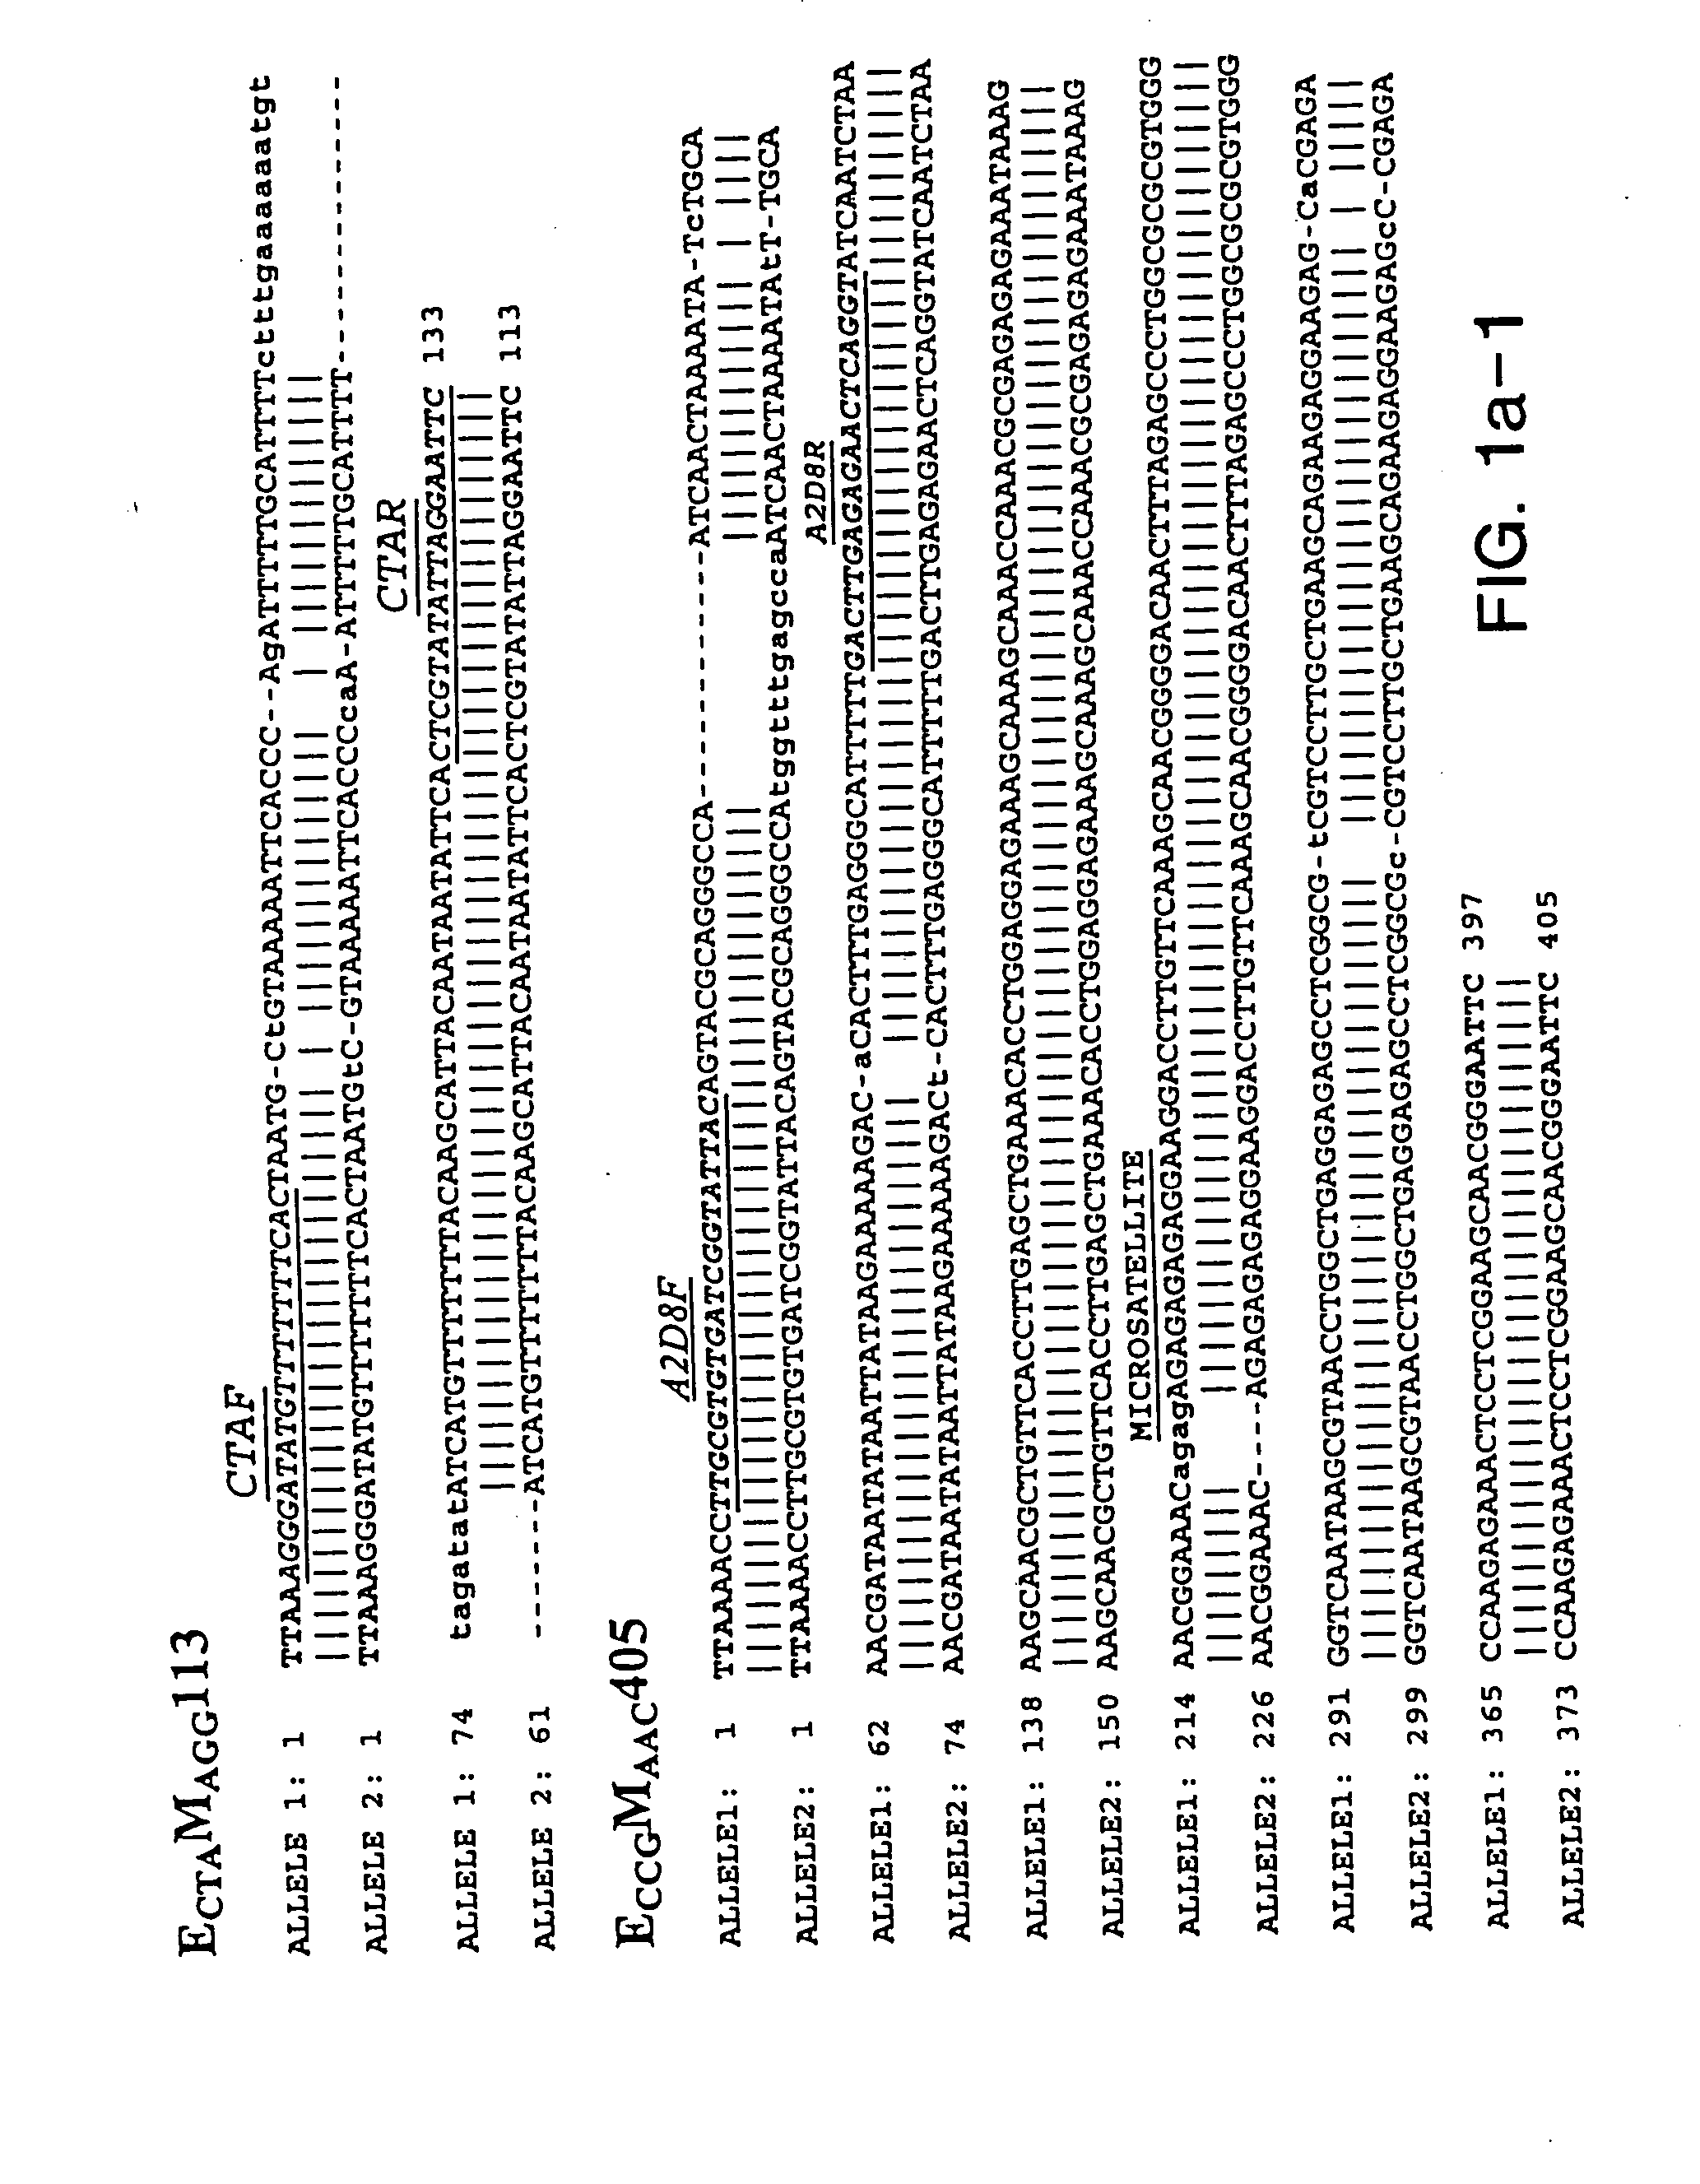 Isolated polynucleotides and polypeptides relating to loci underlying resistance to soybean cyst nematode and soybean sudden death syndrome and methods employing same